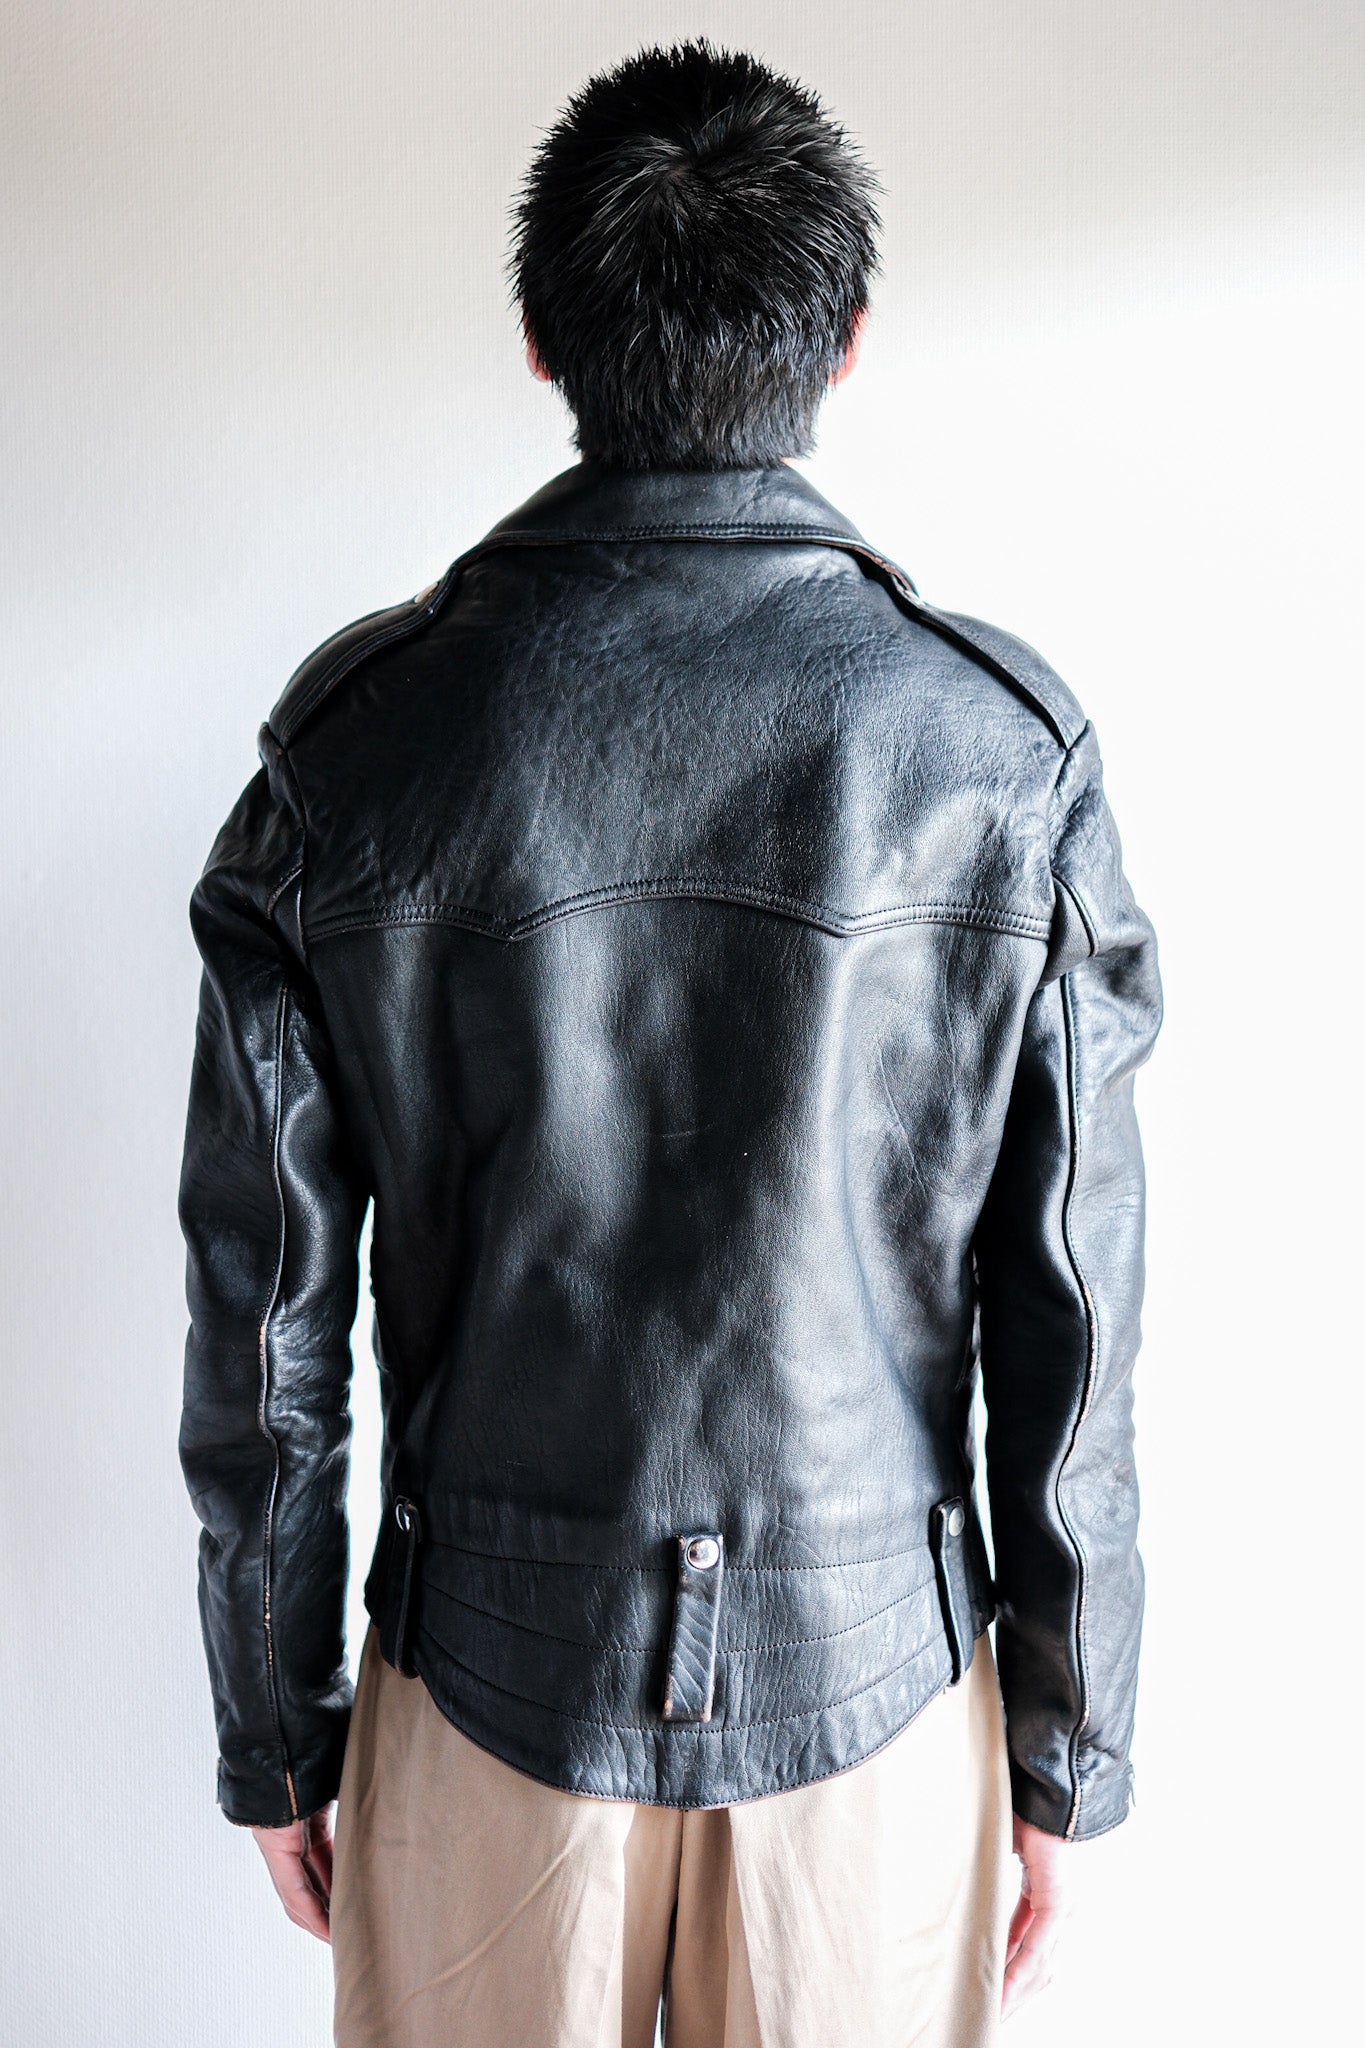 70's] Lewis Leathers Riders Jacket Size.36 